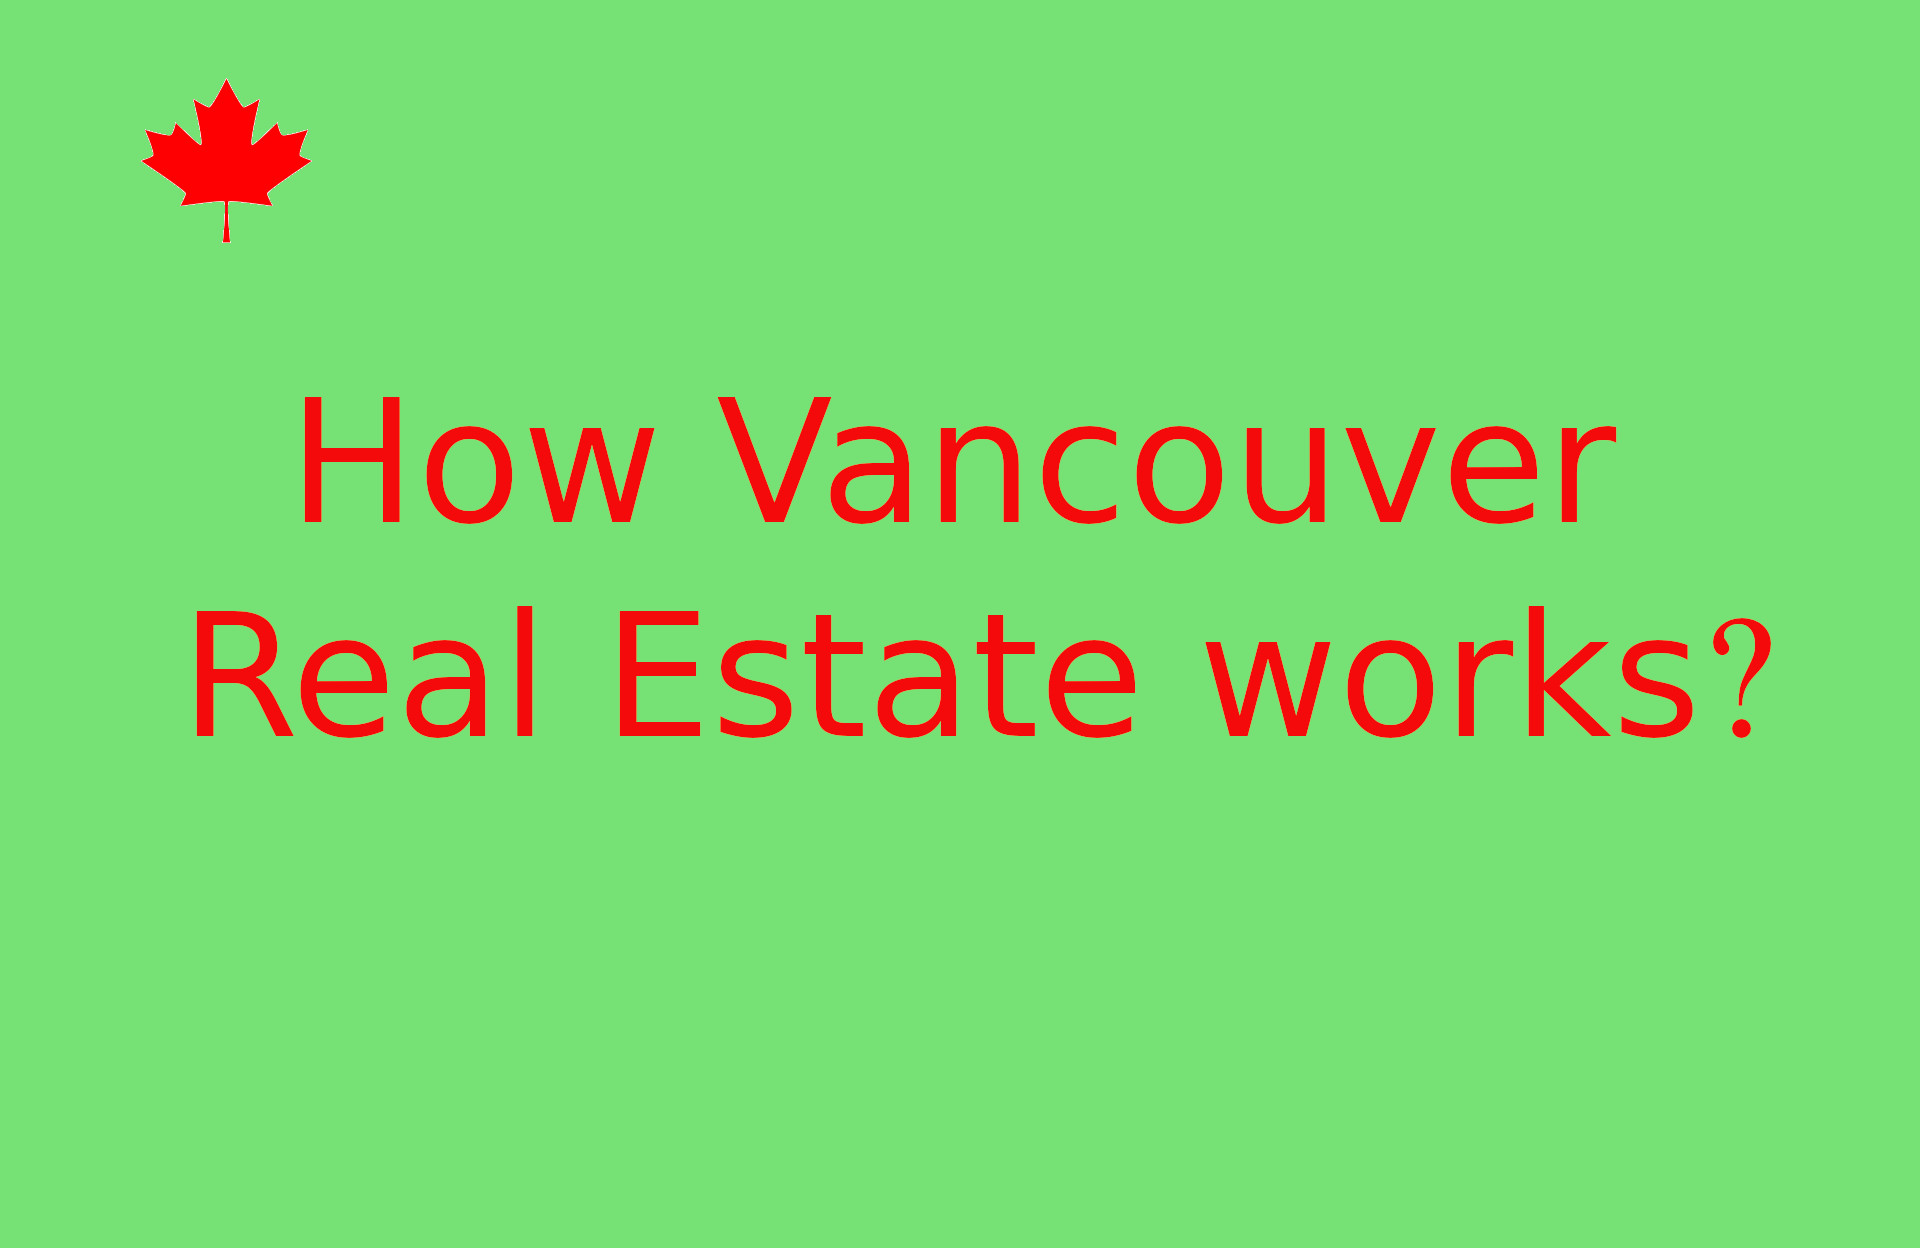 How vancouver real estate works